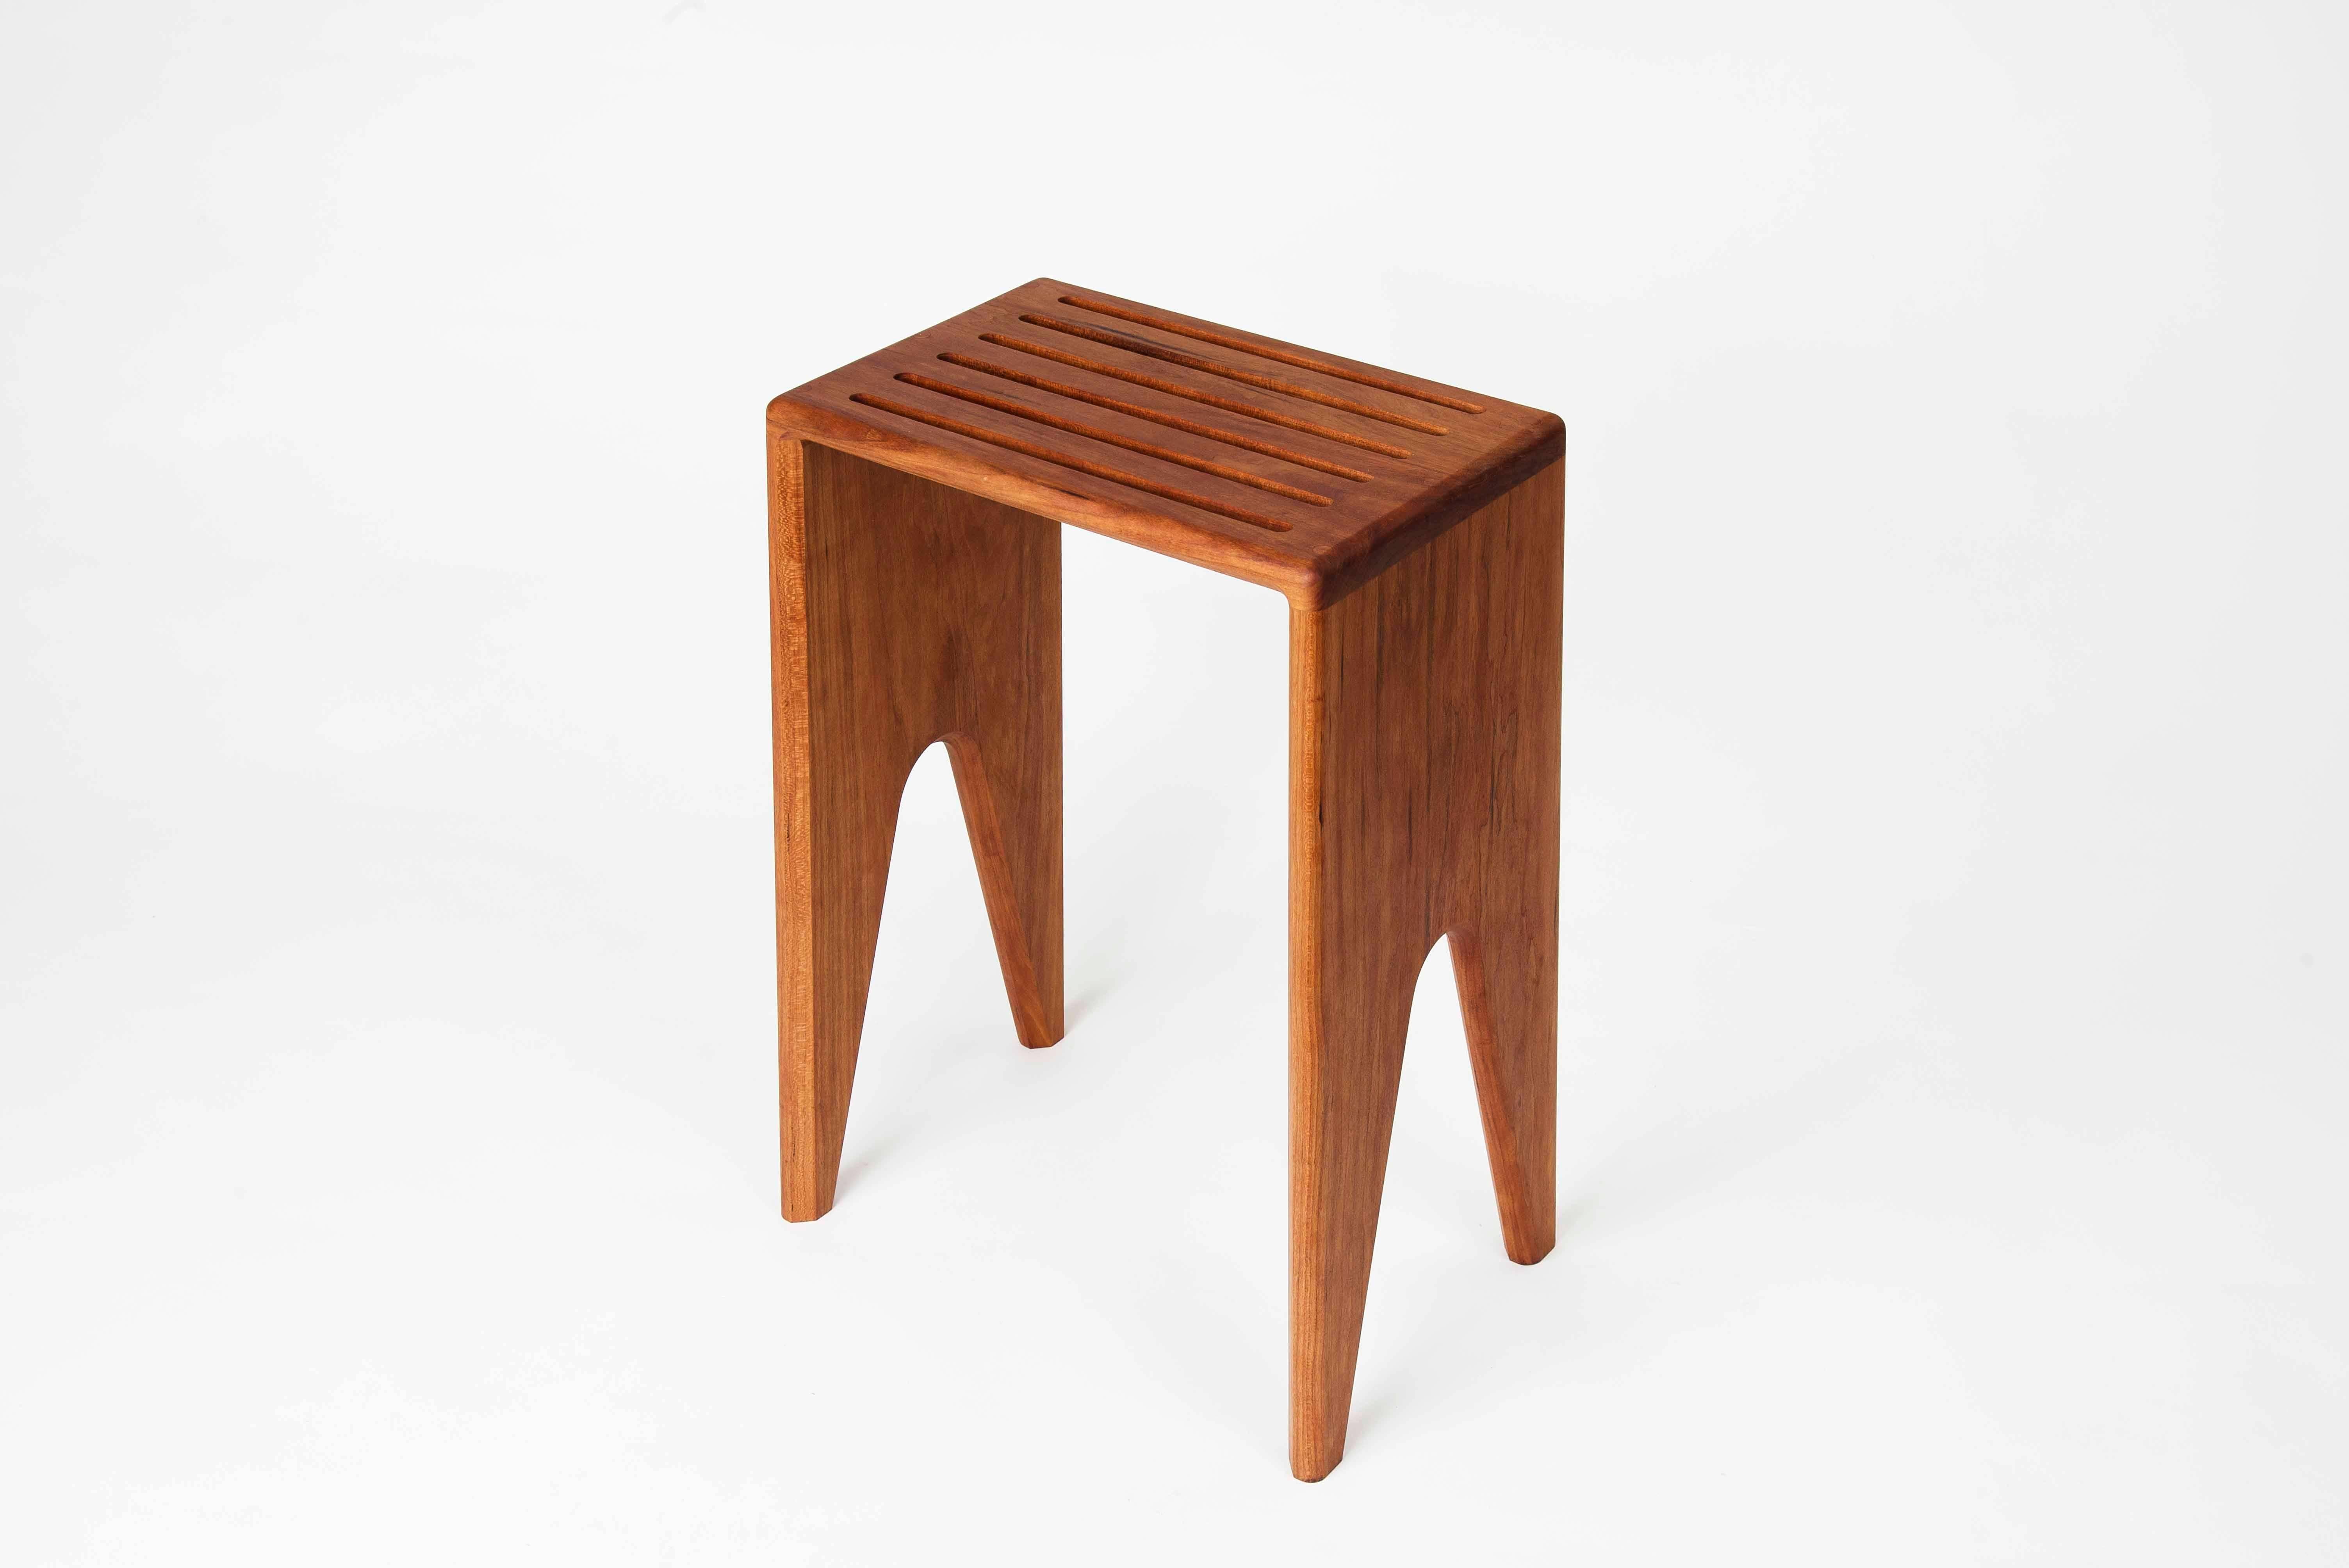 The new prop stool is strong and light, easy to move and always there when you need it. Its usefulness is inspired by the pervasive apple-box found throughout the film industry. It's perfect for spontaneous gatherings or larger than expected dinner